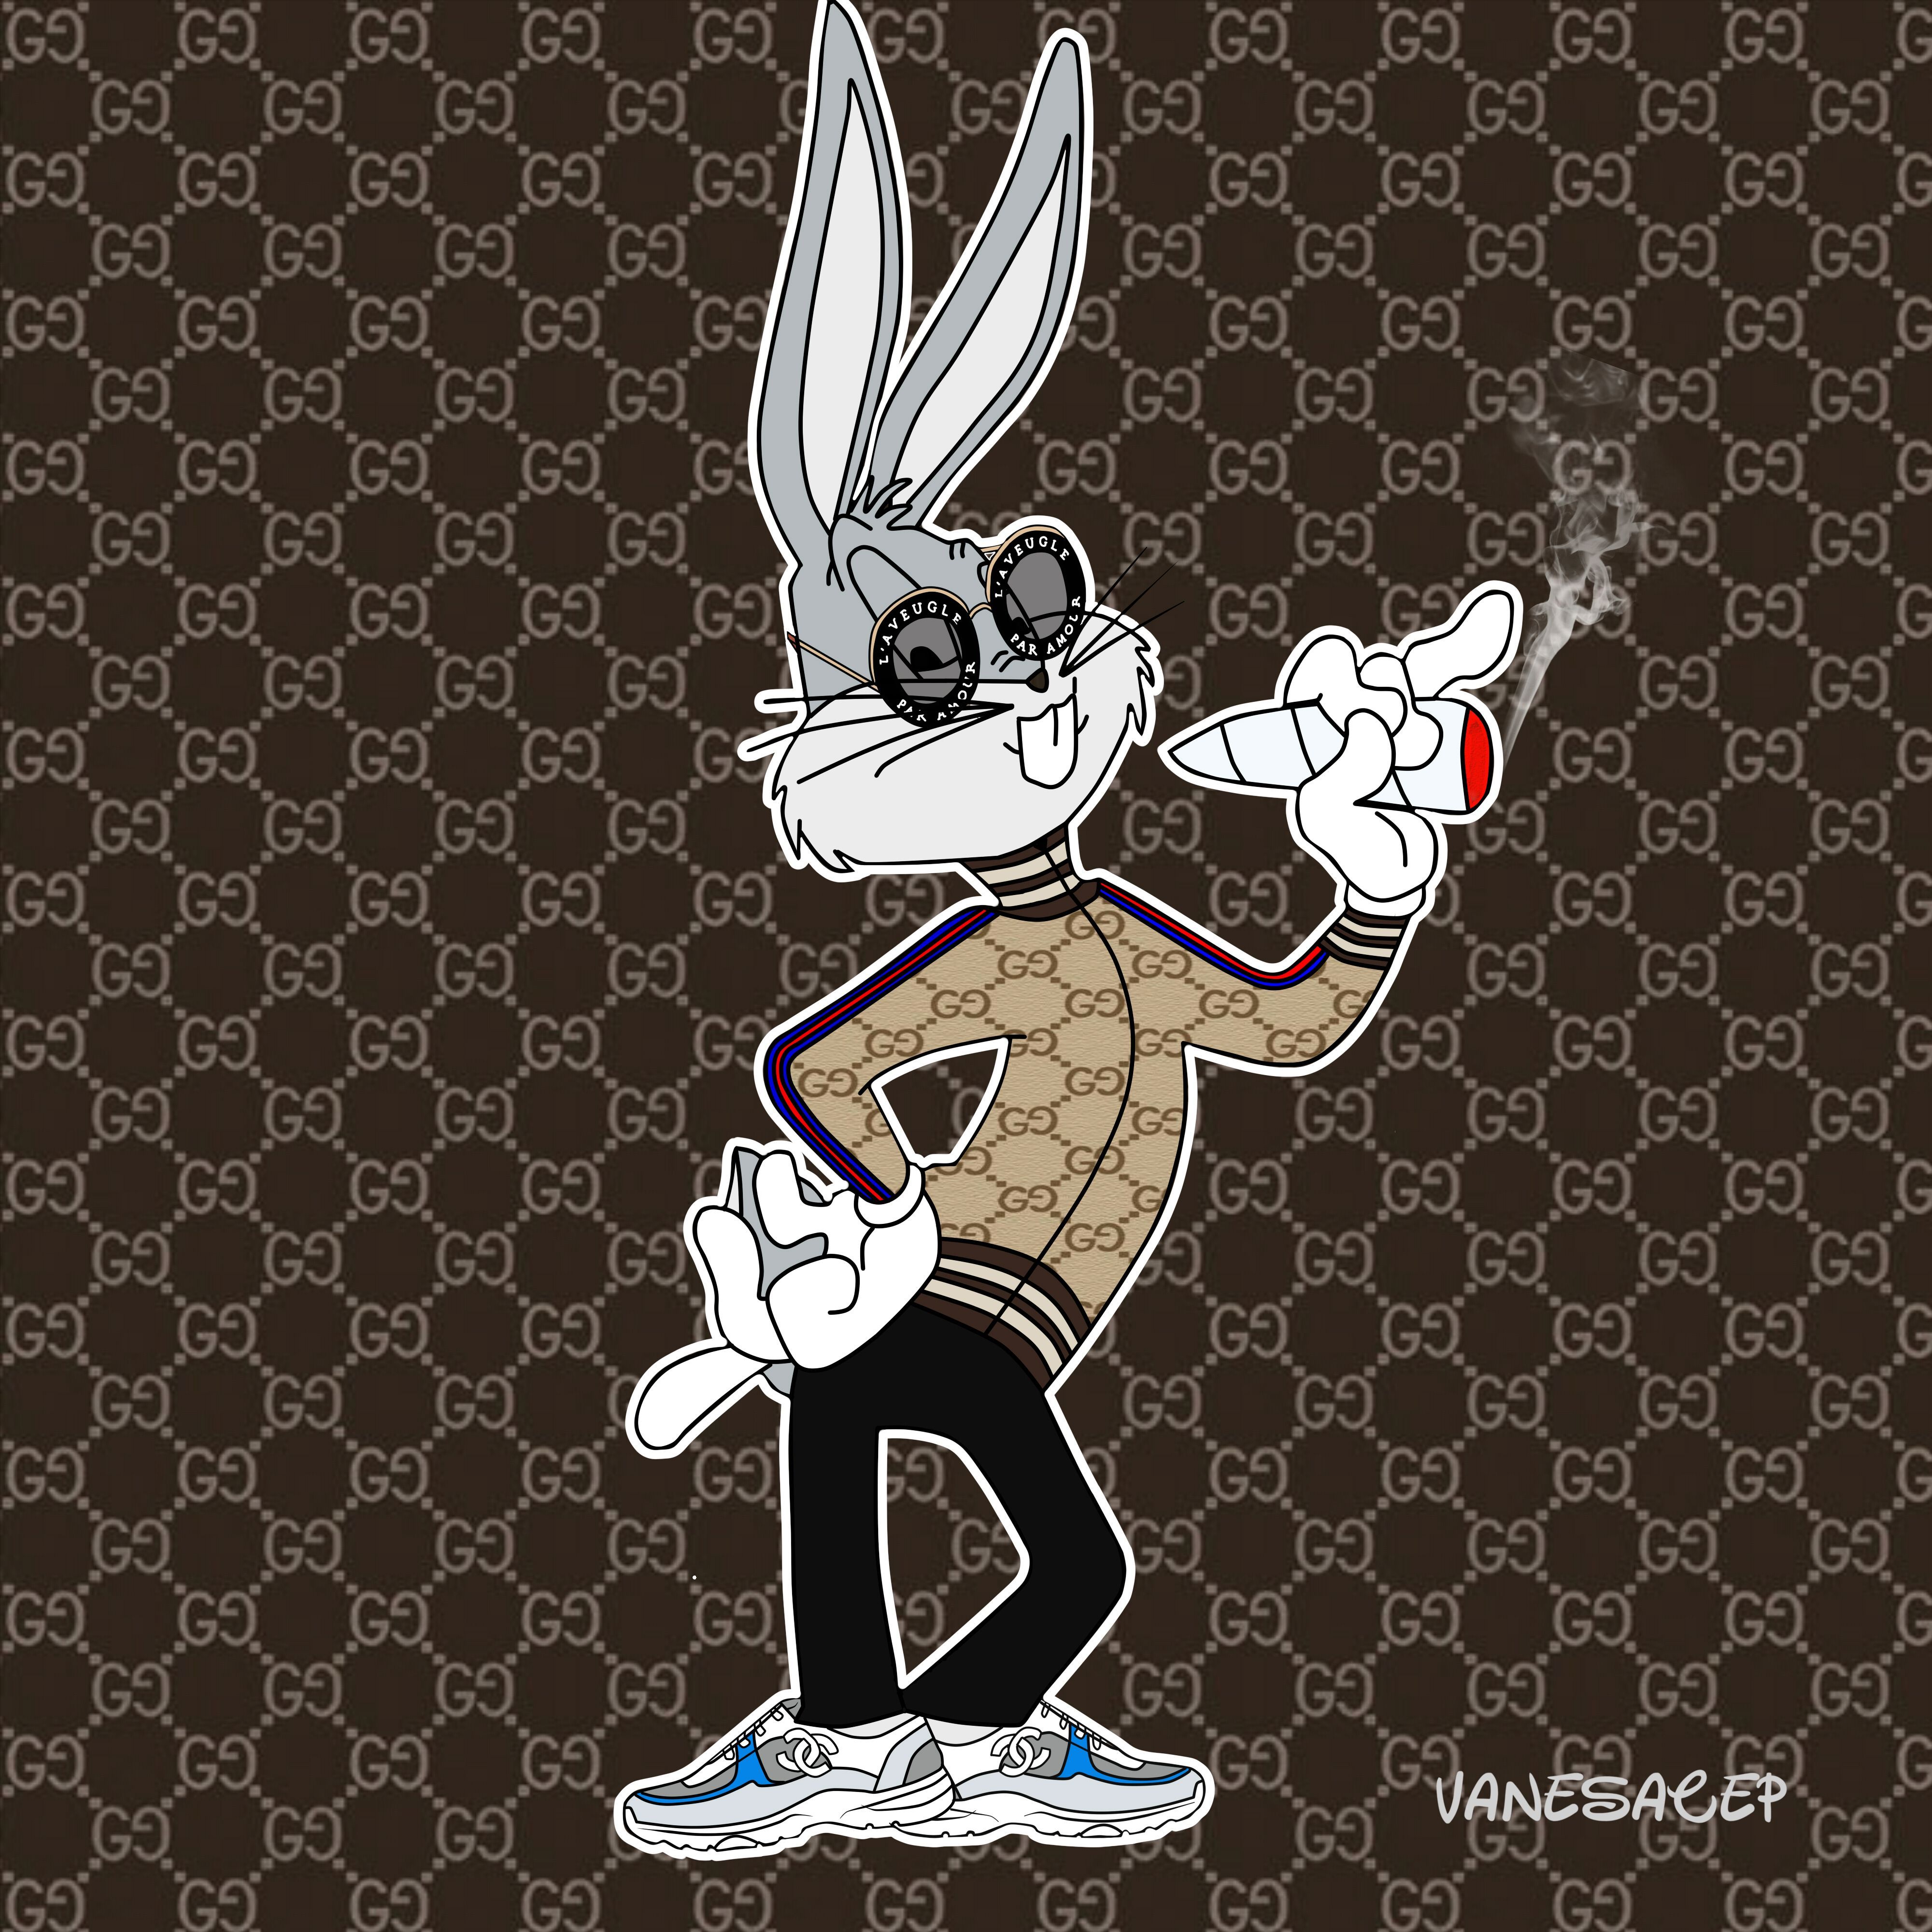 Bugs bunny smoking a blunt in a Gucci sweater and Vans shoes - Bugs Bunny